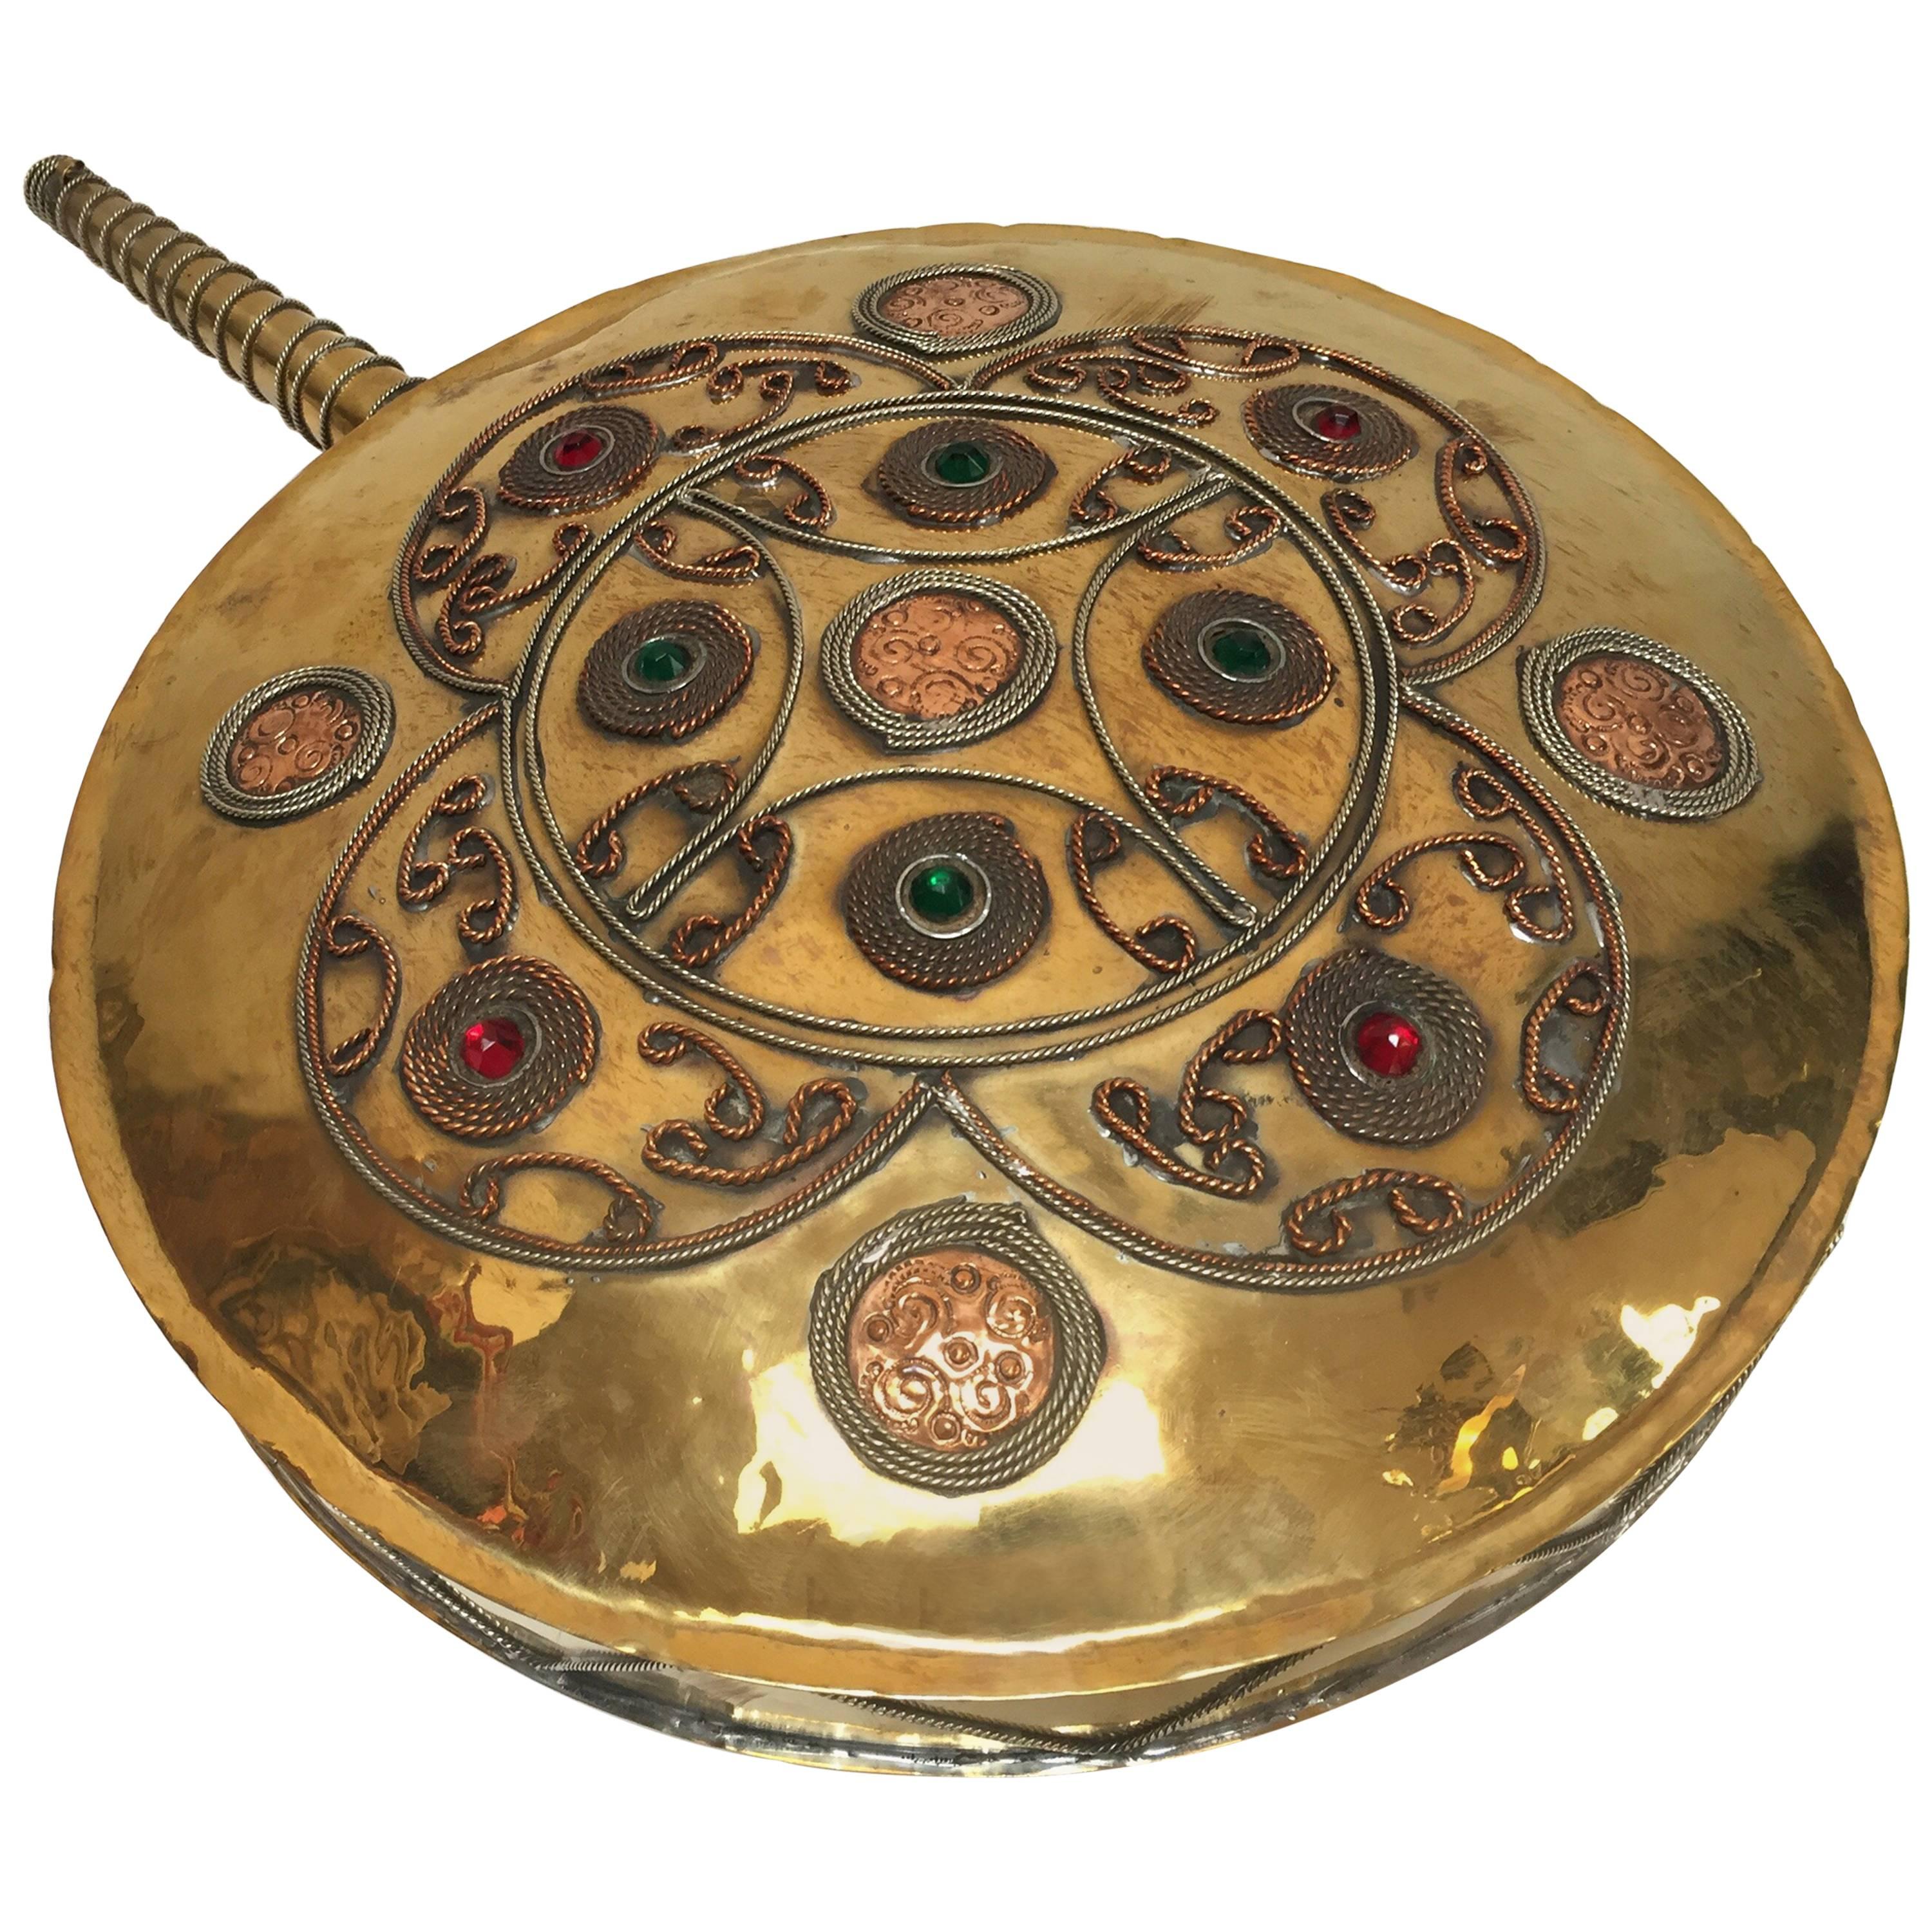 Moroccan antique tribal drinking flask gunpowder large brass flask polished and decorated with semi precious glass stones and filigree metal. 
Huge antique copper and brass decorative bottle, flask wall hanging sculpture.
Large brass circular